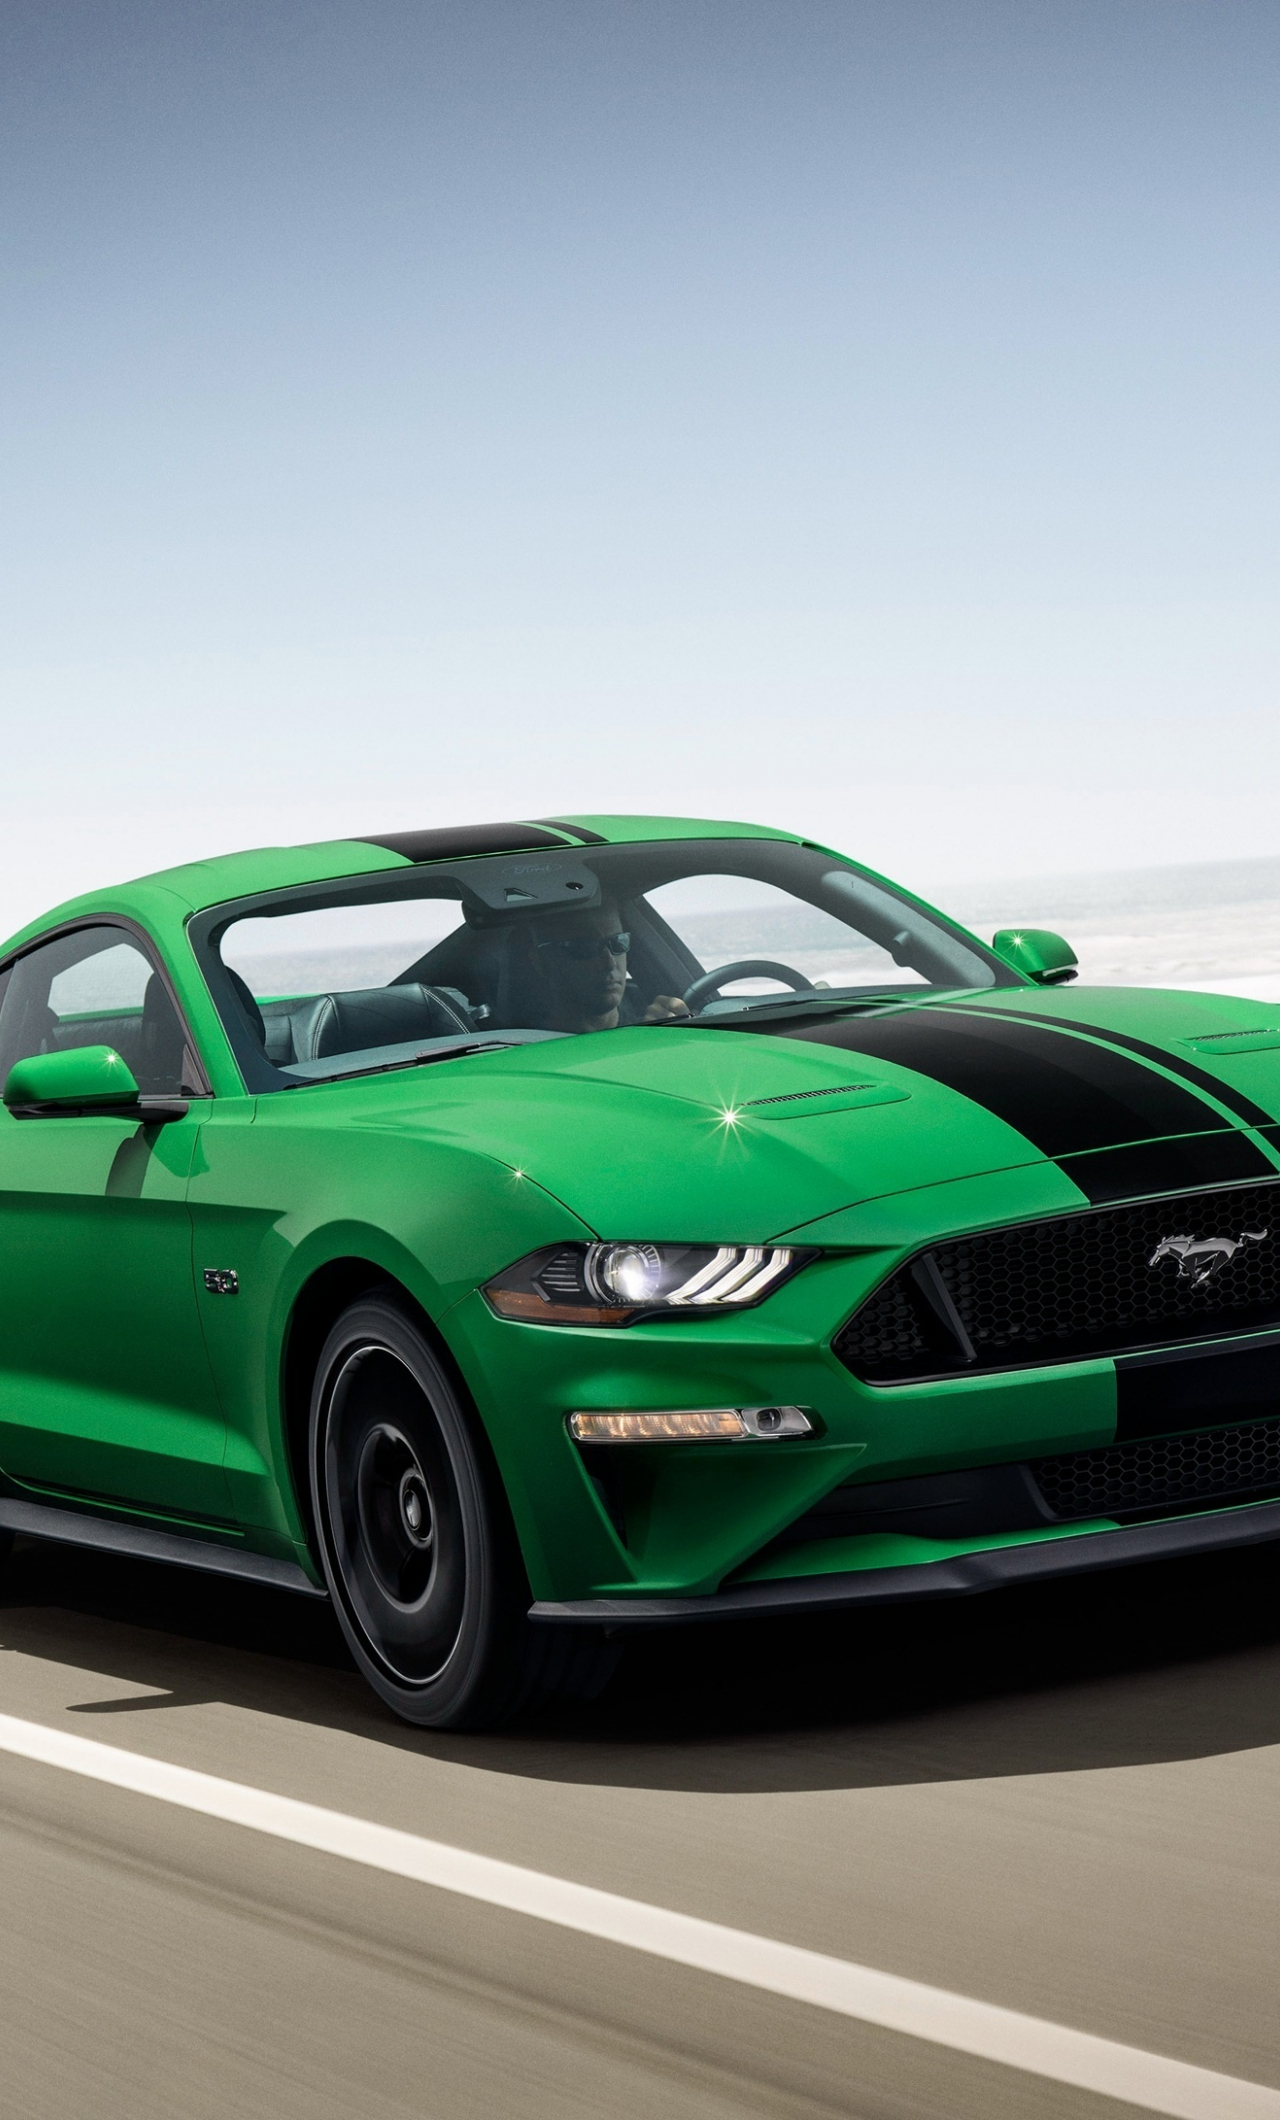 Mustang Car Wallpapers For Iphone 6